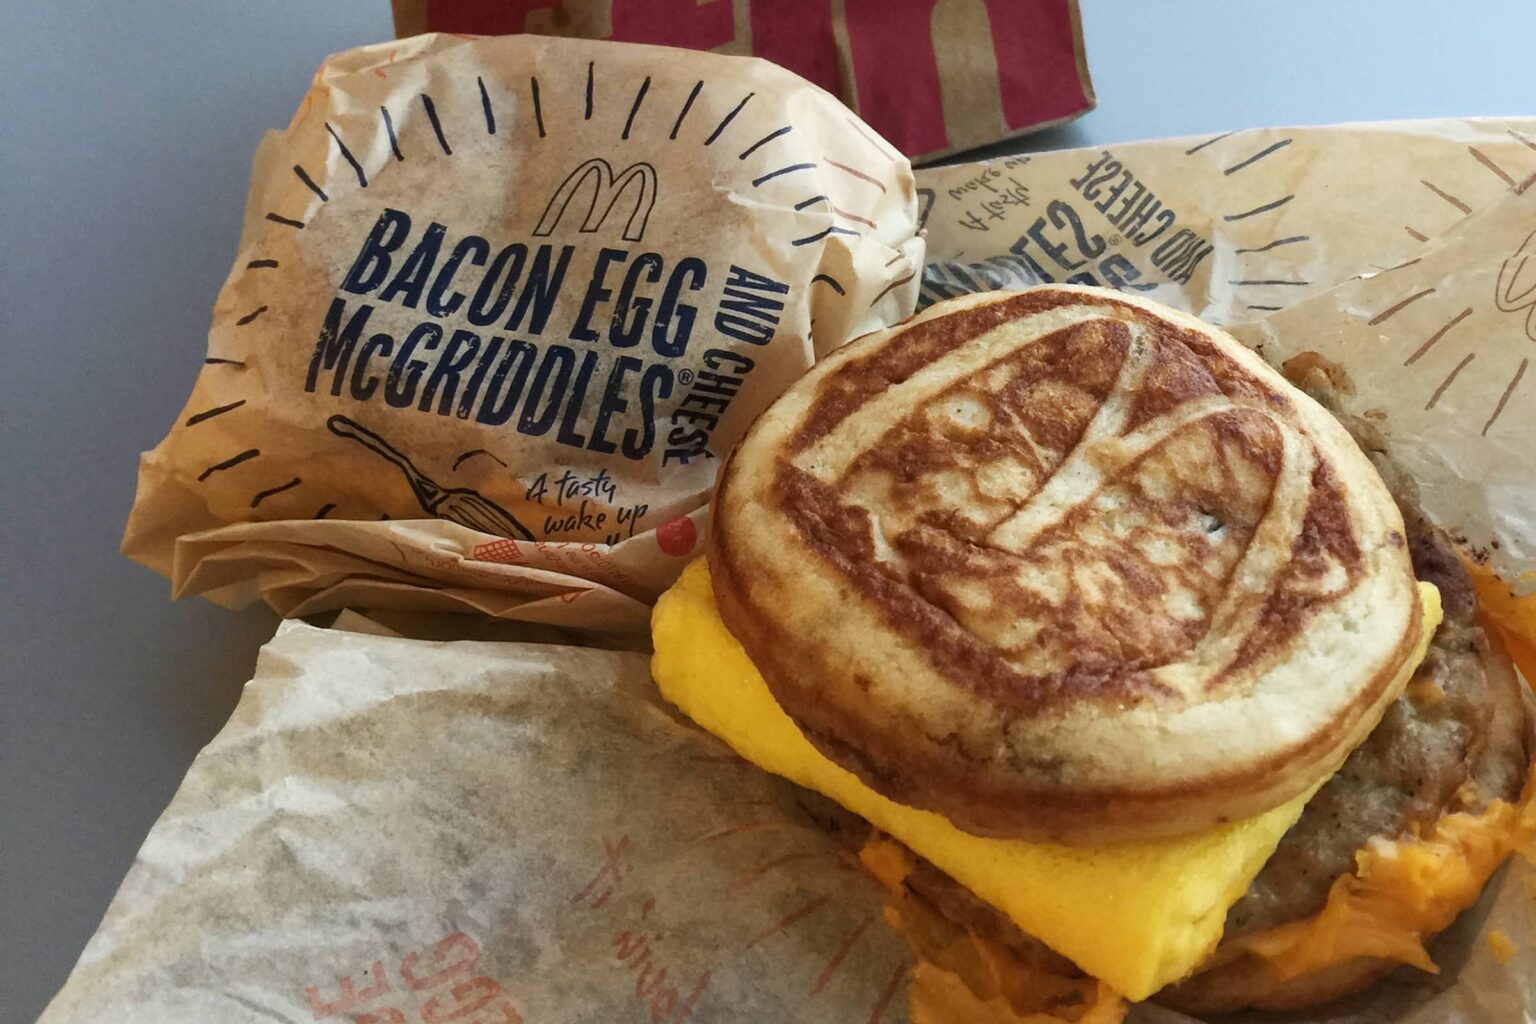 Today, thousands of people started their day debating which is better, the egg McMuffin or the sausage McGriddle. See the best tweets on the divisive poll.